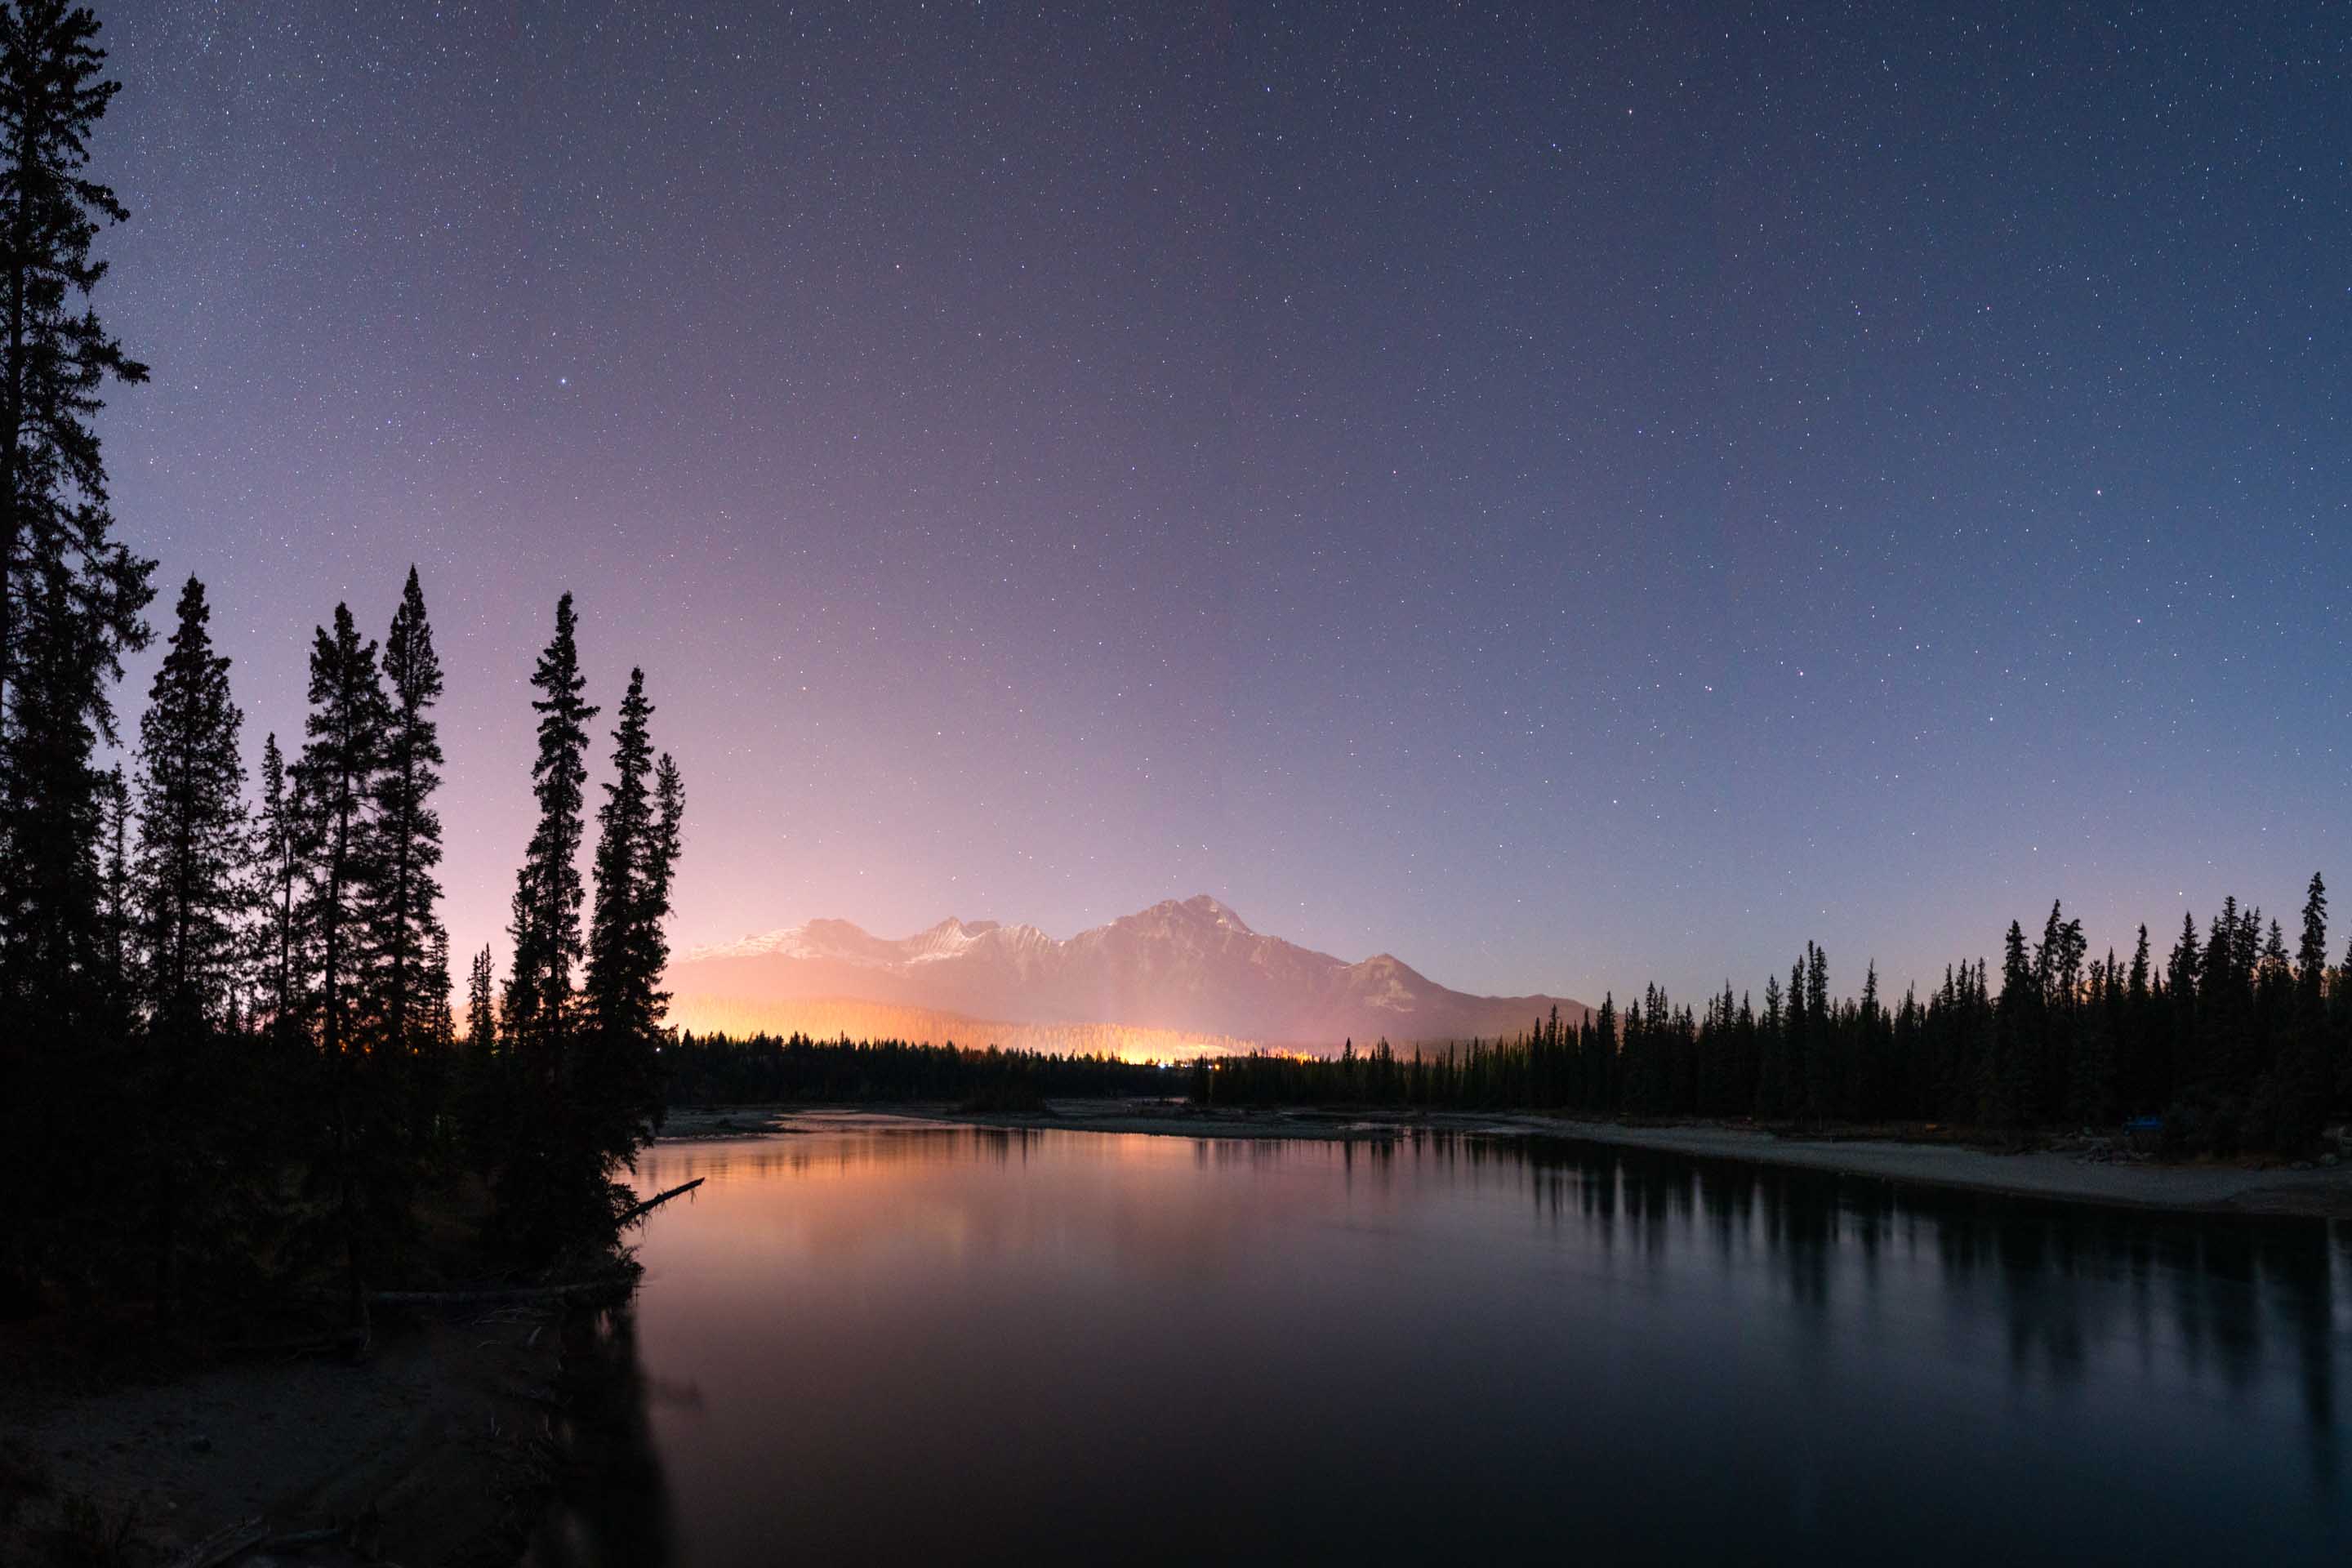 From Old Fort Point, this image shows the small amount of light pollution in Jasper National Park. Between this viewpoint and the distant Pyramid Mountain, the town of Jasper barely affects the view of the night sky.